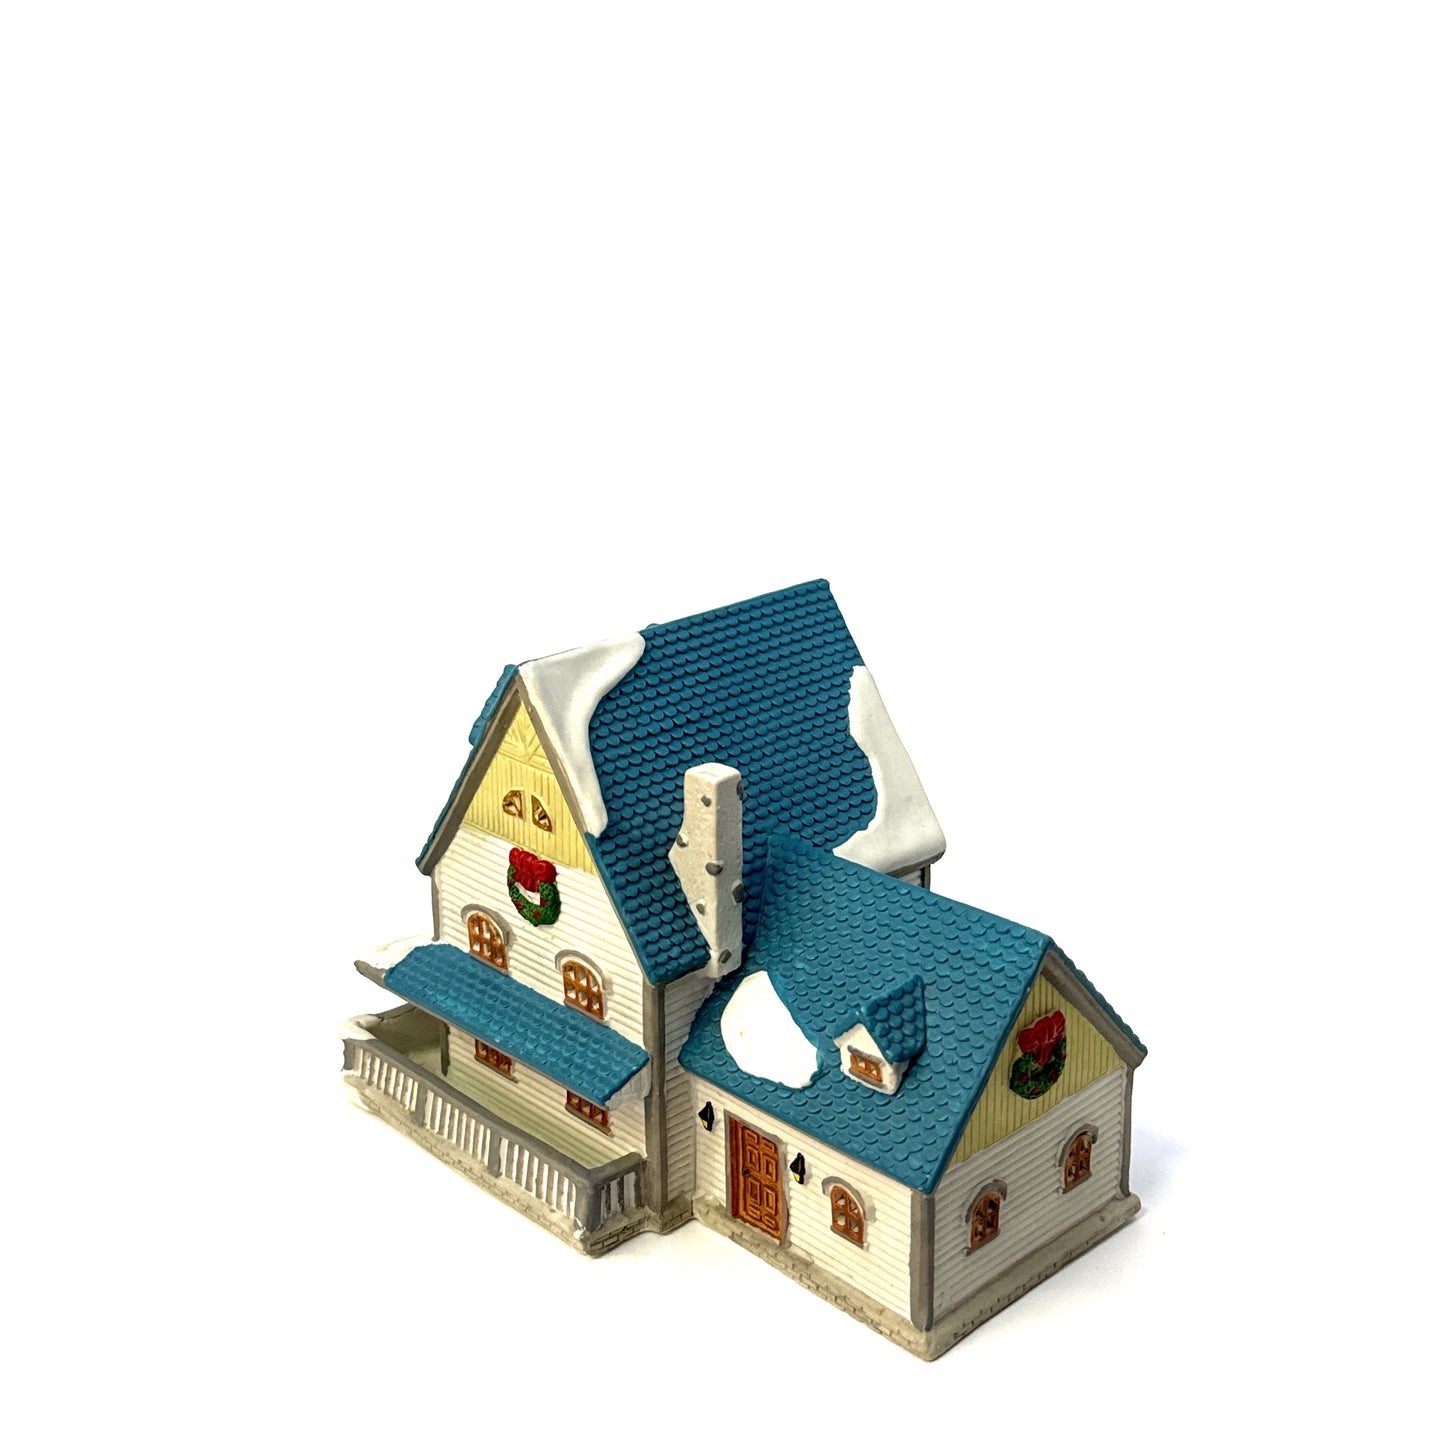 Lemax Dickensvale | Porcelain Lighted House, Blue Roof | 1995 | EUC Retired